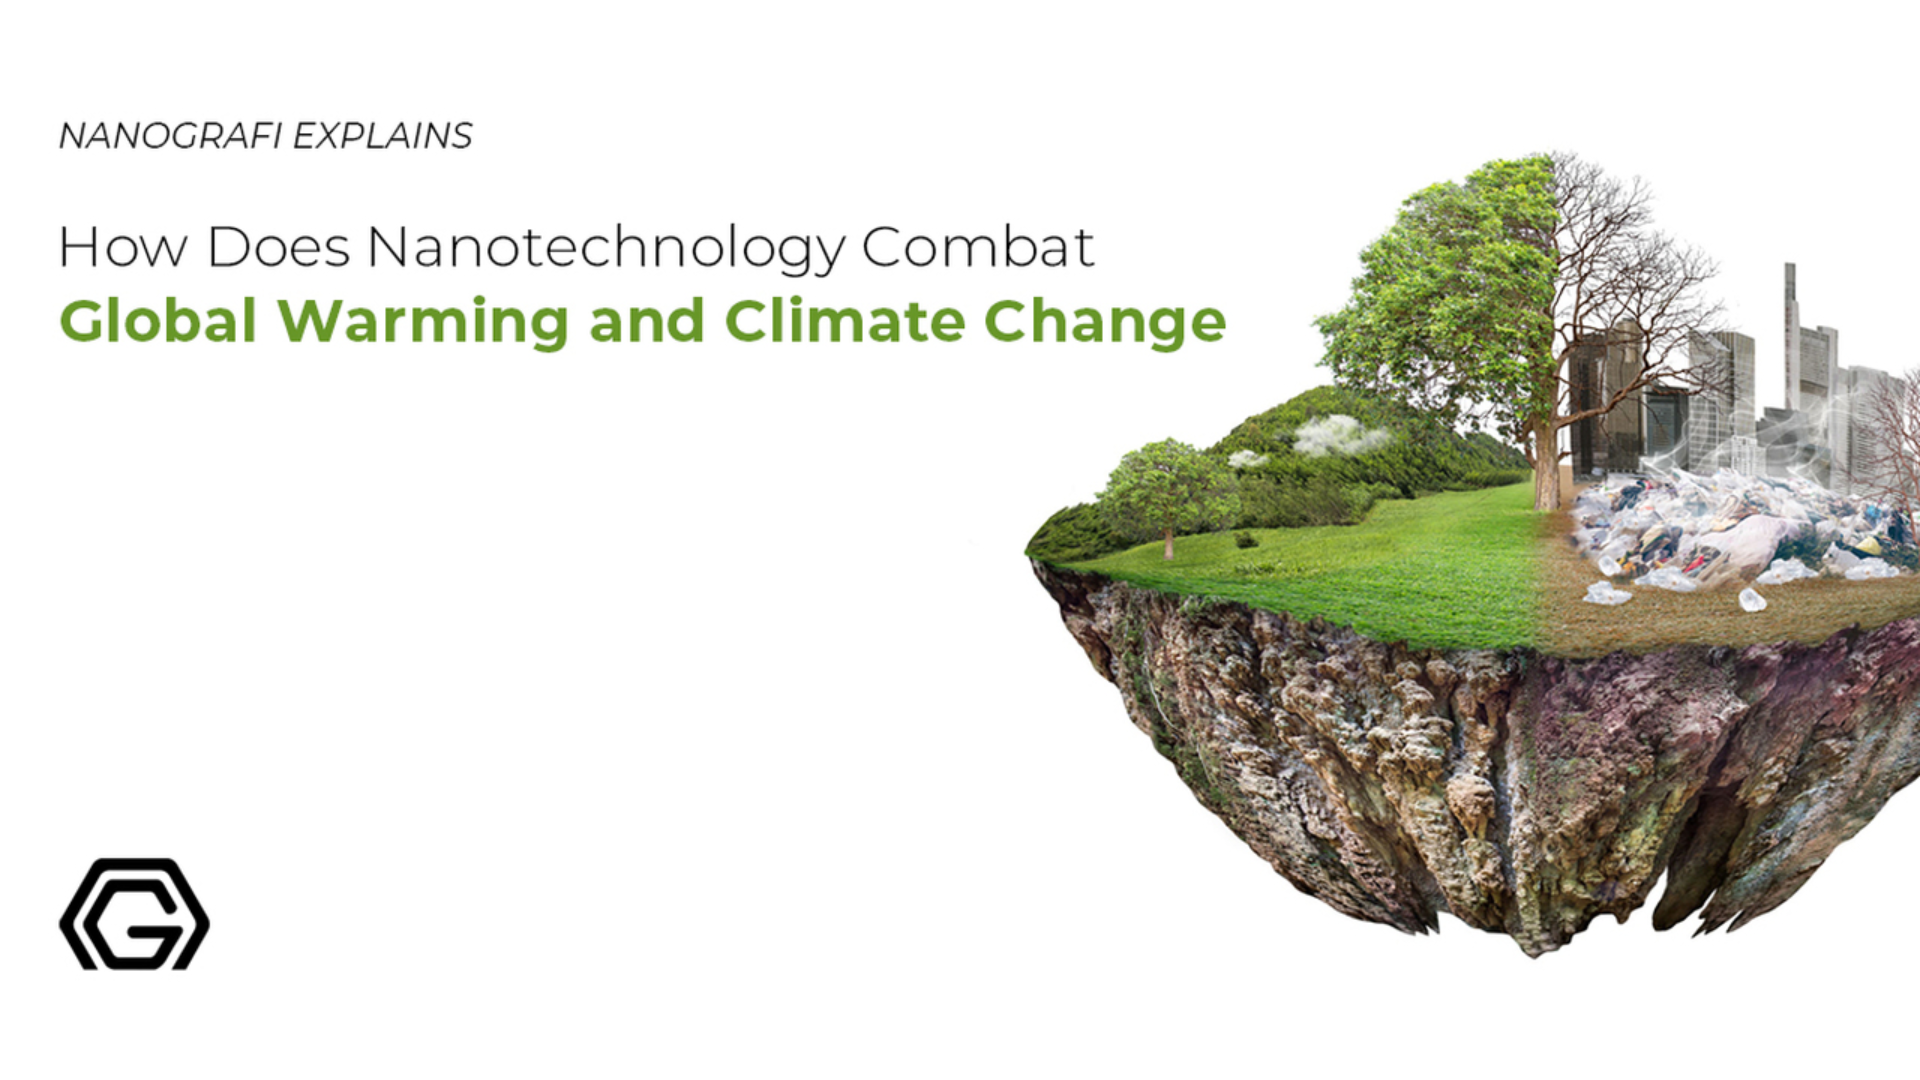 How does nanotechnology combat global warming and climate change